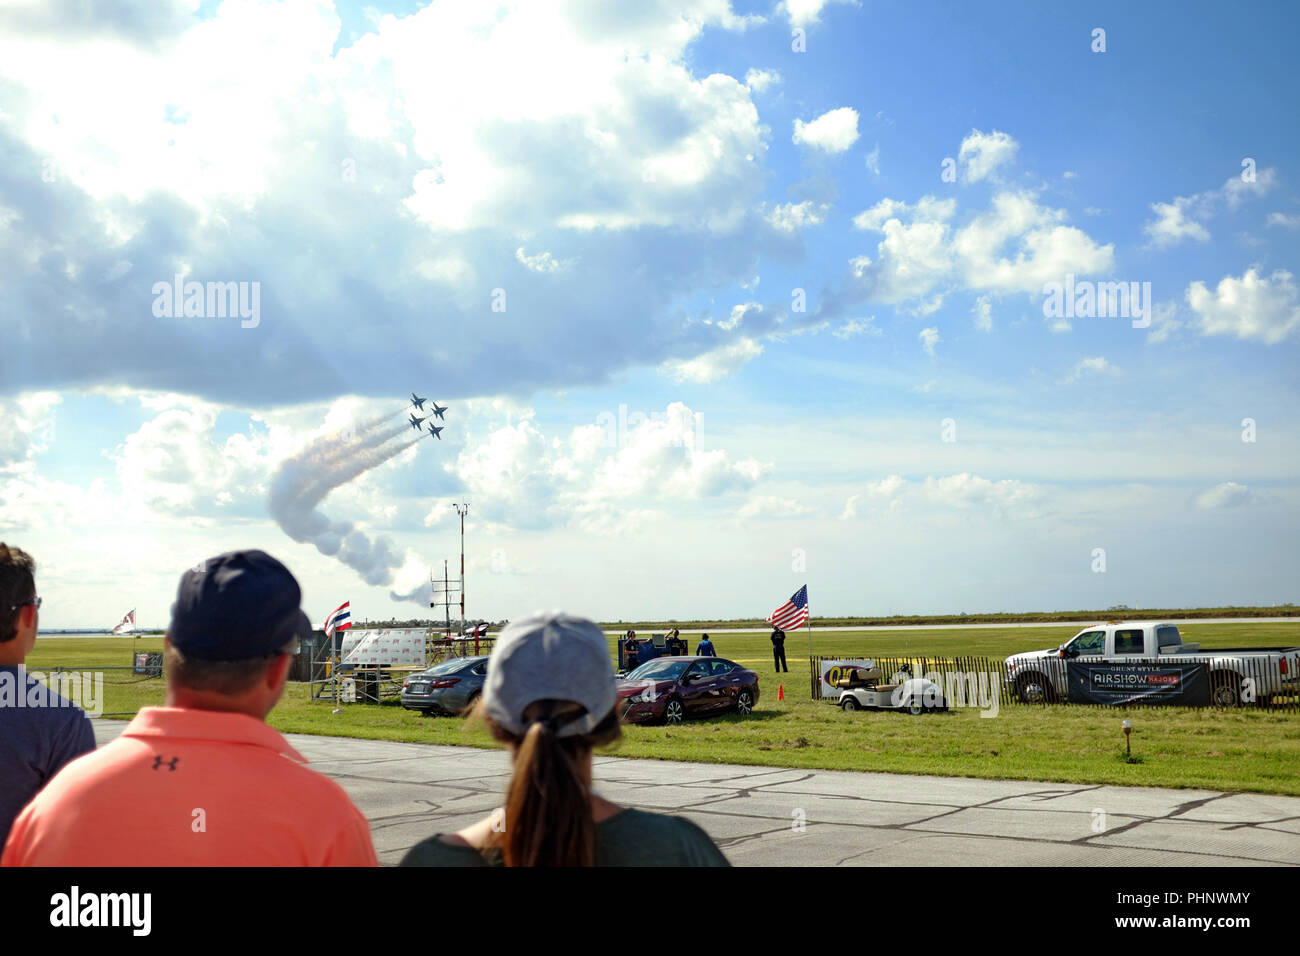 Cleveland, Ohio, USA, 1st Sept, 2018. Spectators watch the U.S. Navy Blue Angels perform in the sky during the 54th Annual Cleveland National Air Show held over the US Labor Day holiday weekend.  The performance is held on the Cleveland, Ohio lakefront at Burke Lakefront Airport.  Credit: Mark Kanning/Alamy Live News. Stock Photo